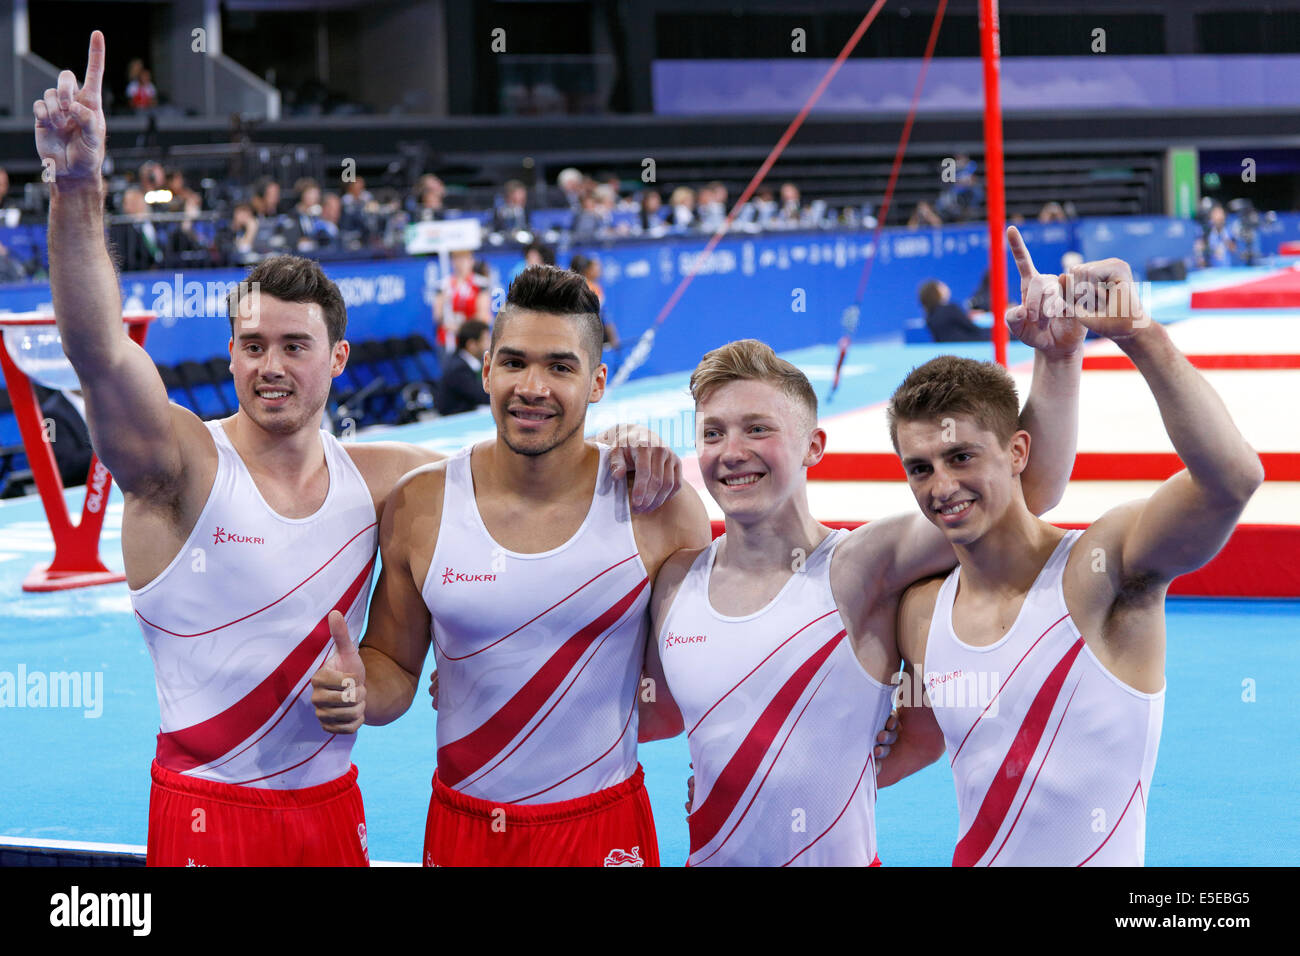 SSE Hydro, Glasgow, Scotland, UK, Tuesday, 29th July, 2014. Four of the England Artistic Gymnastics Team celebrate winning Gold in the competition at the Glasgow 2014 Commonwealth Games. Left to Right. Kristian Thomas, Louis Smith, Nile Wilson and Max Whitlock Stock Photo